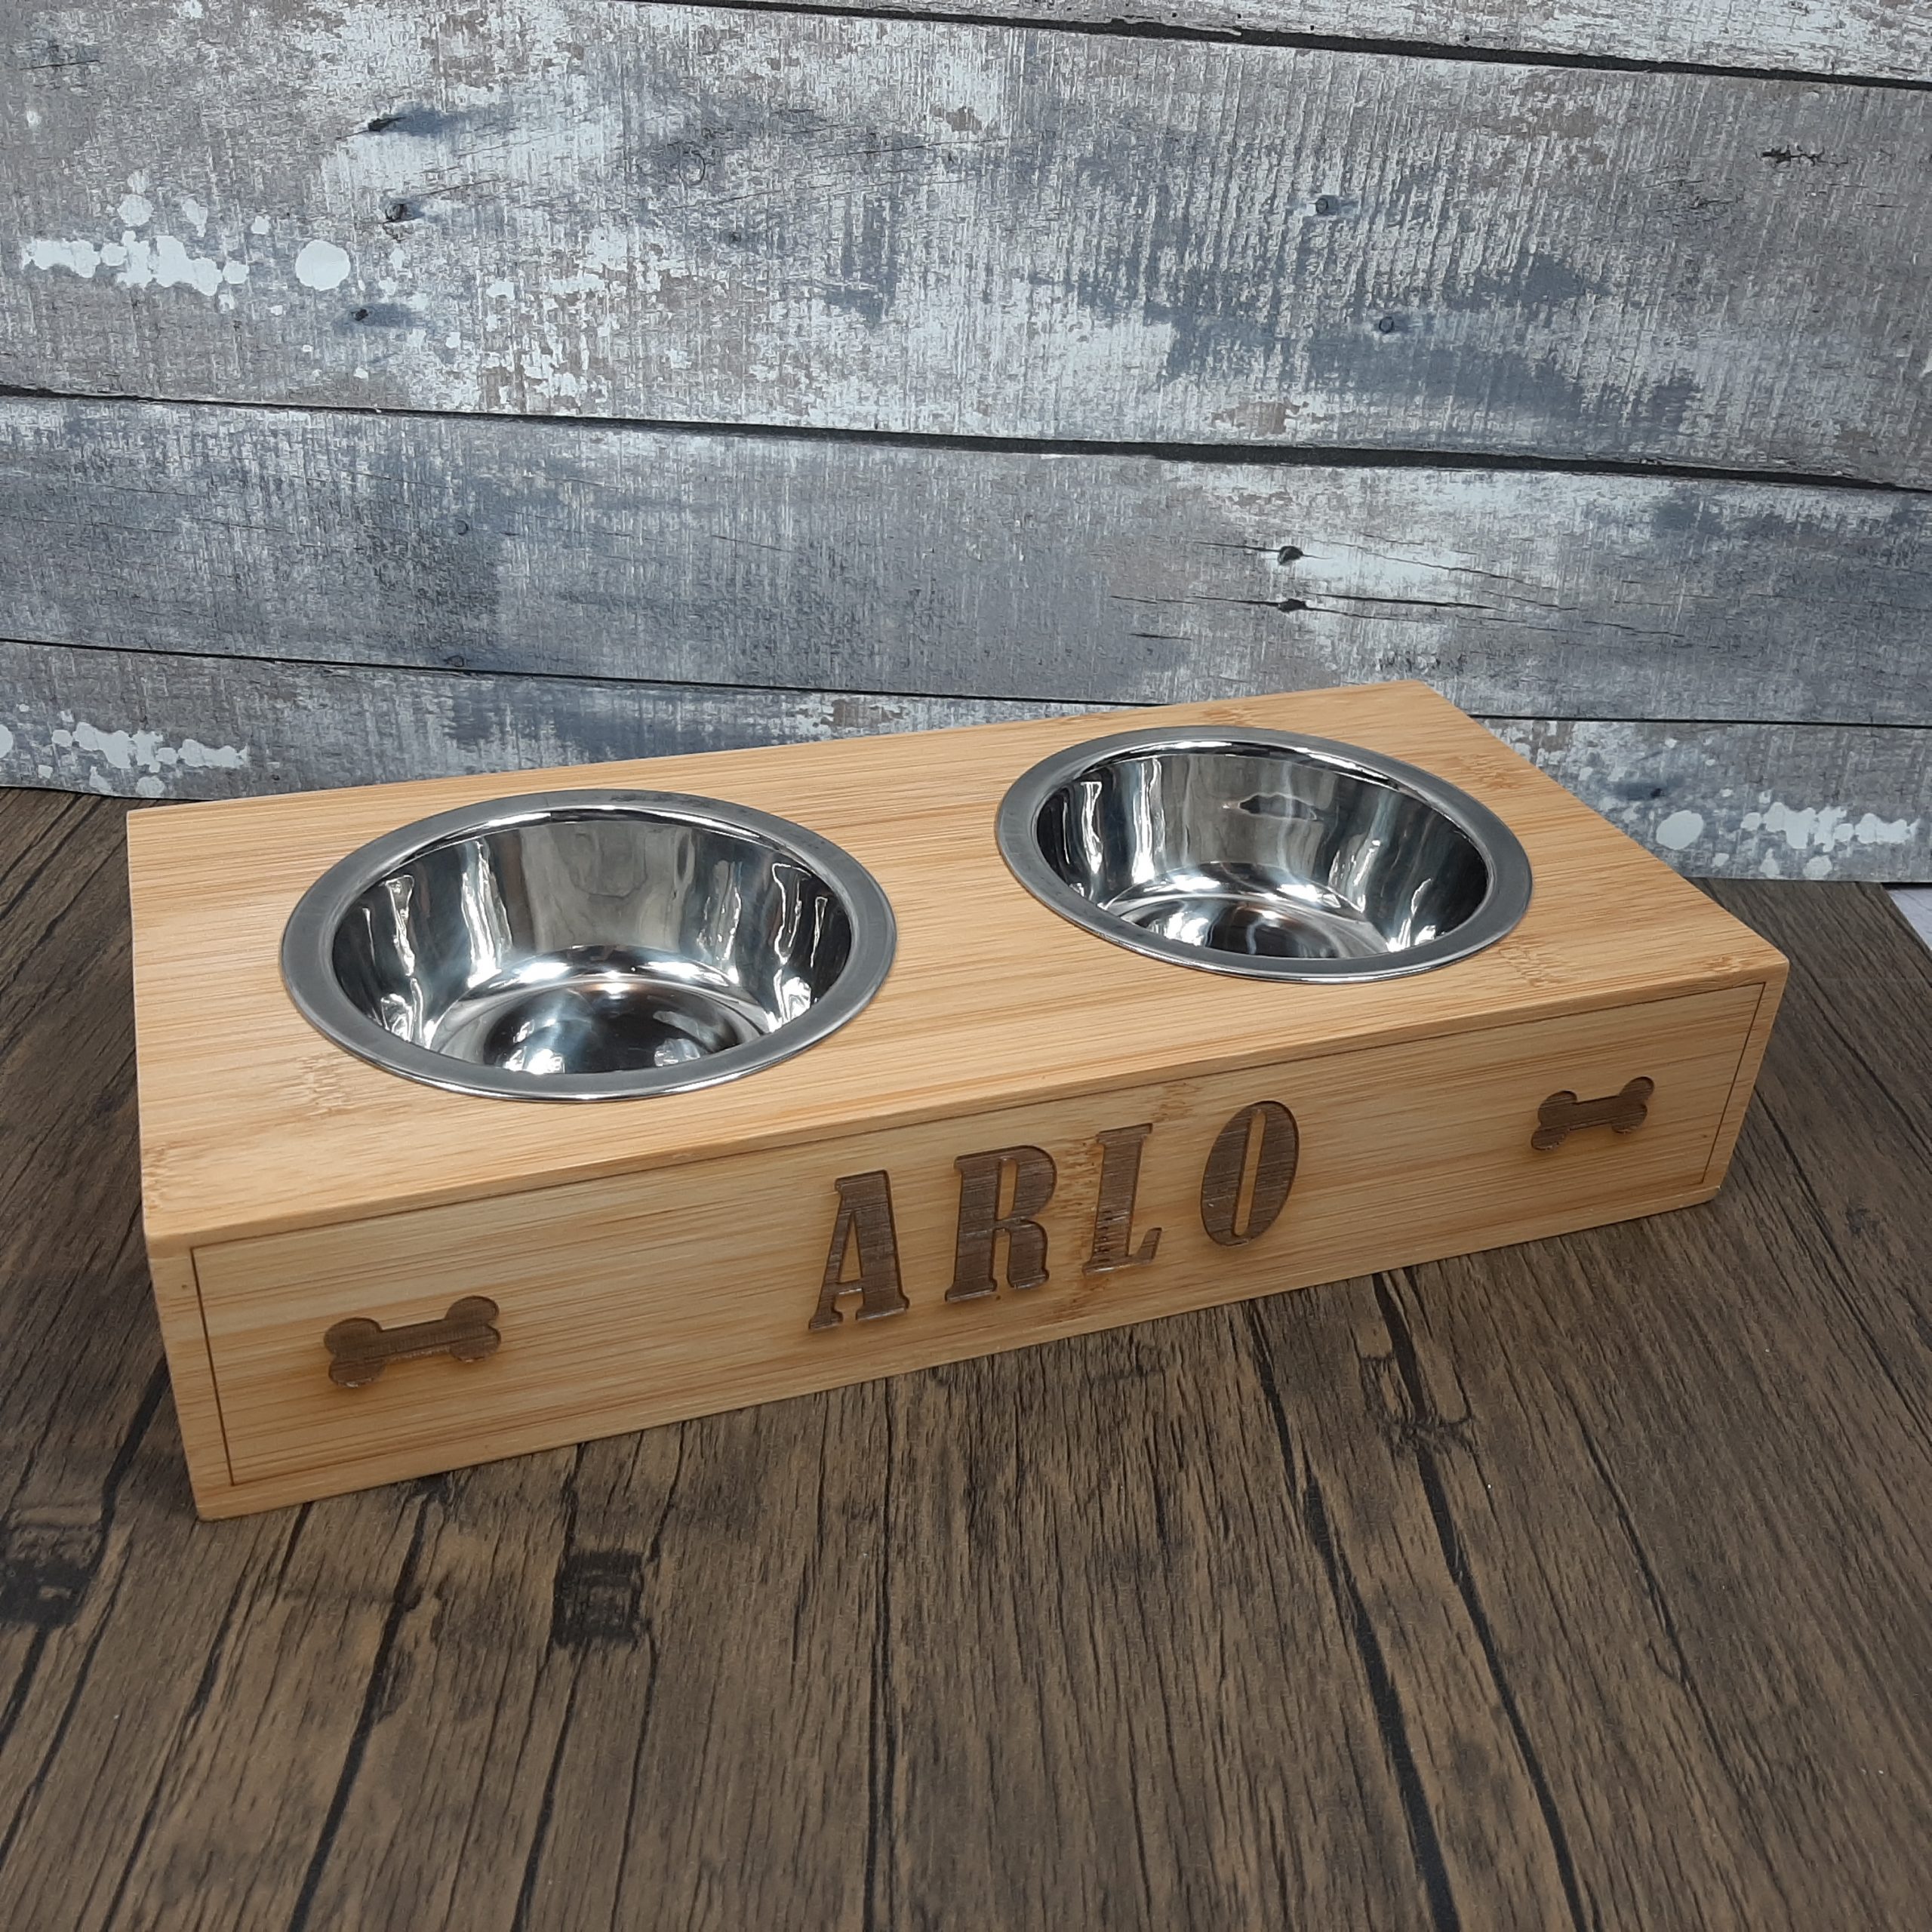 Wooden Pet Bowl Riser with bone engraved personalisation